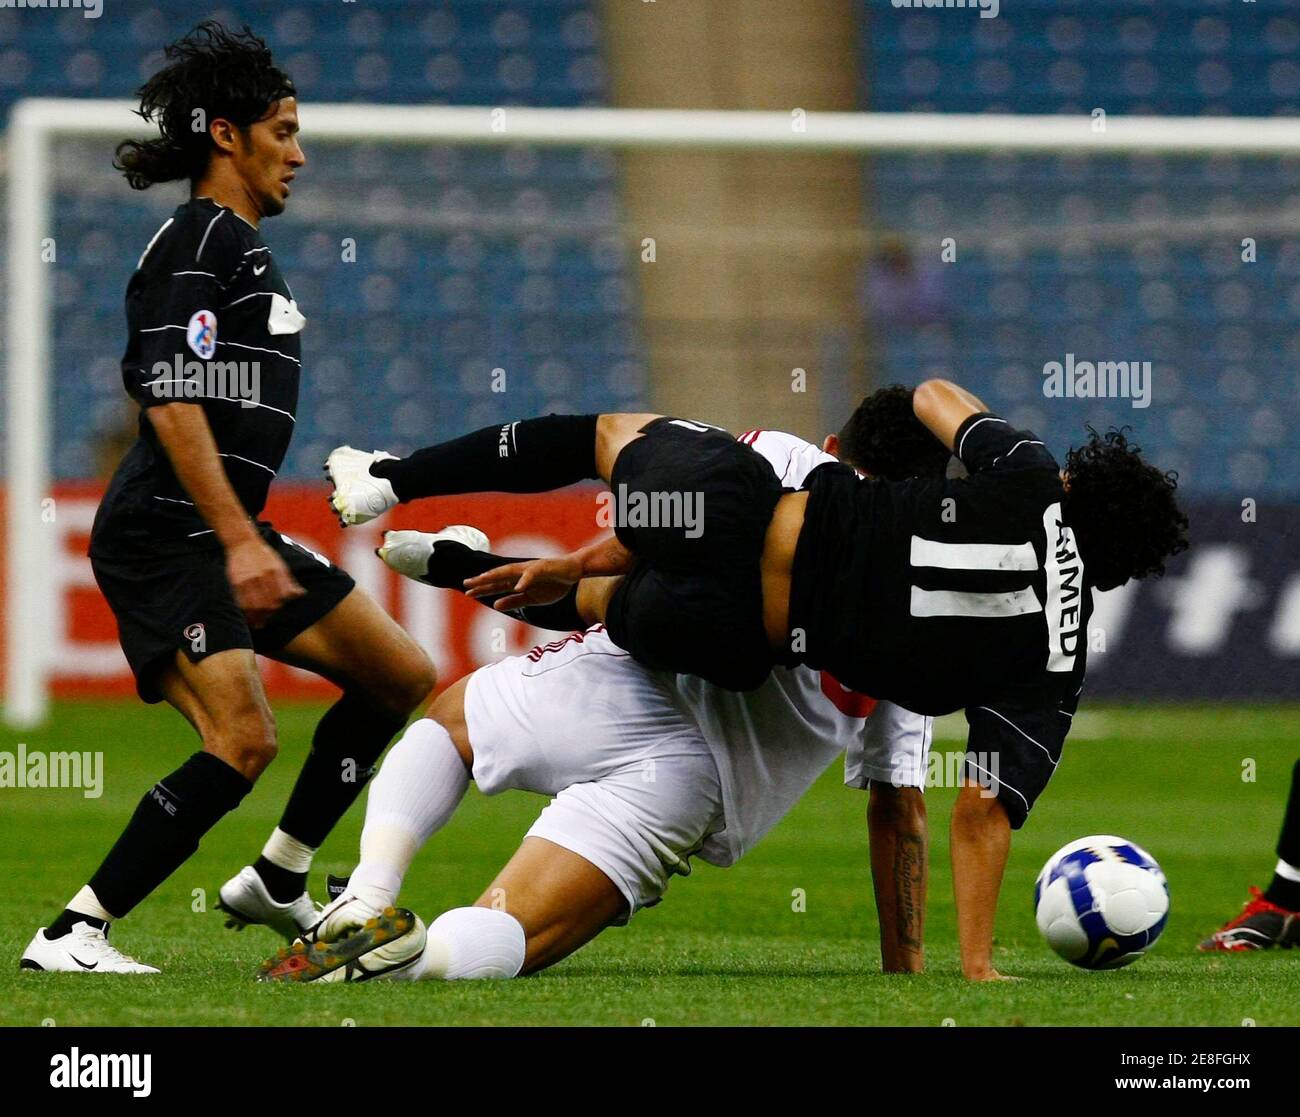 Ahmed Ateef of Saudi Arabia's Al-Shabab (Black) fights for the ball with Roberto Lopes of UAE's Al Sharjah during their AFC Champions League soccer match in Riyadh April 21, 2009.  REUTERS/Fahad Shadeed  (SAUDI ARABIA SPORT SOCCER) Stock Photo